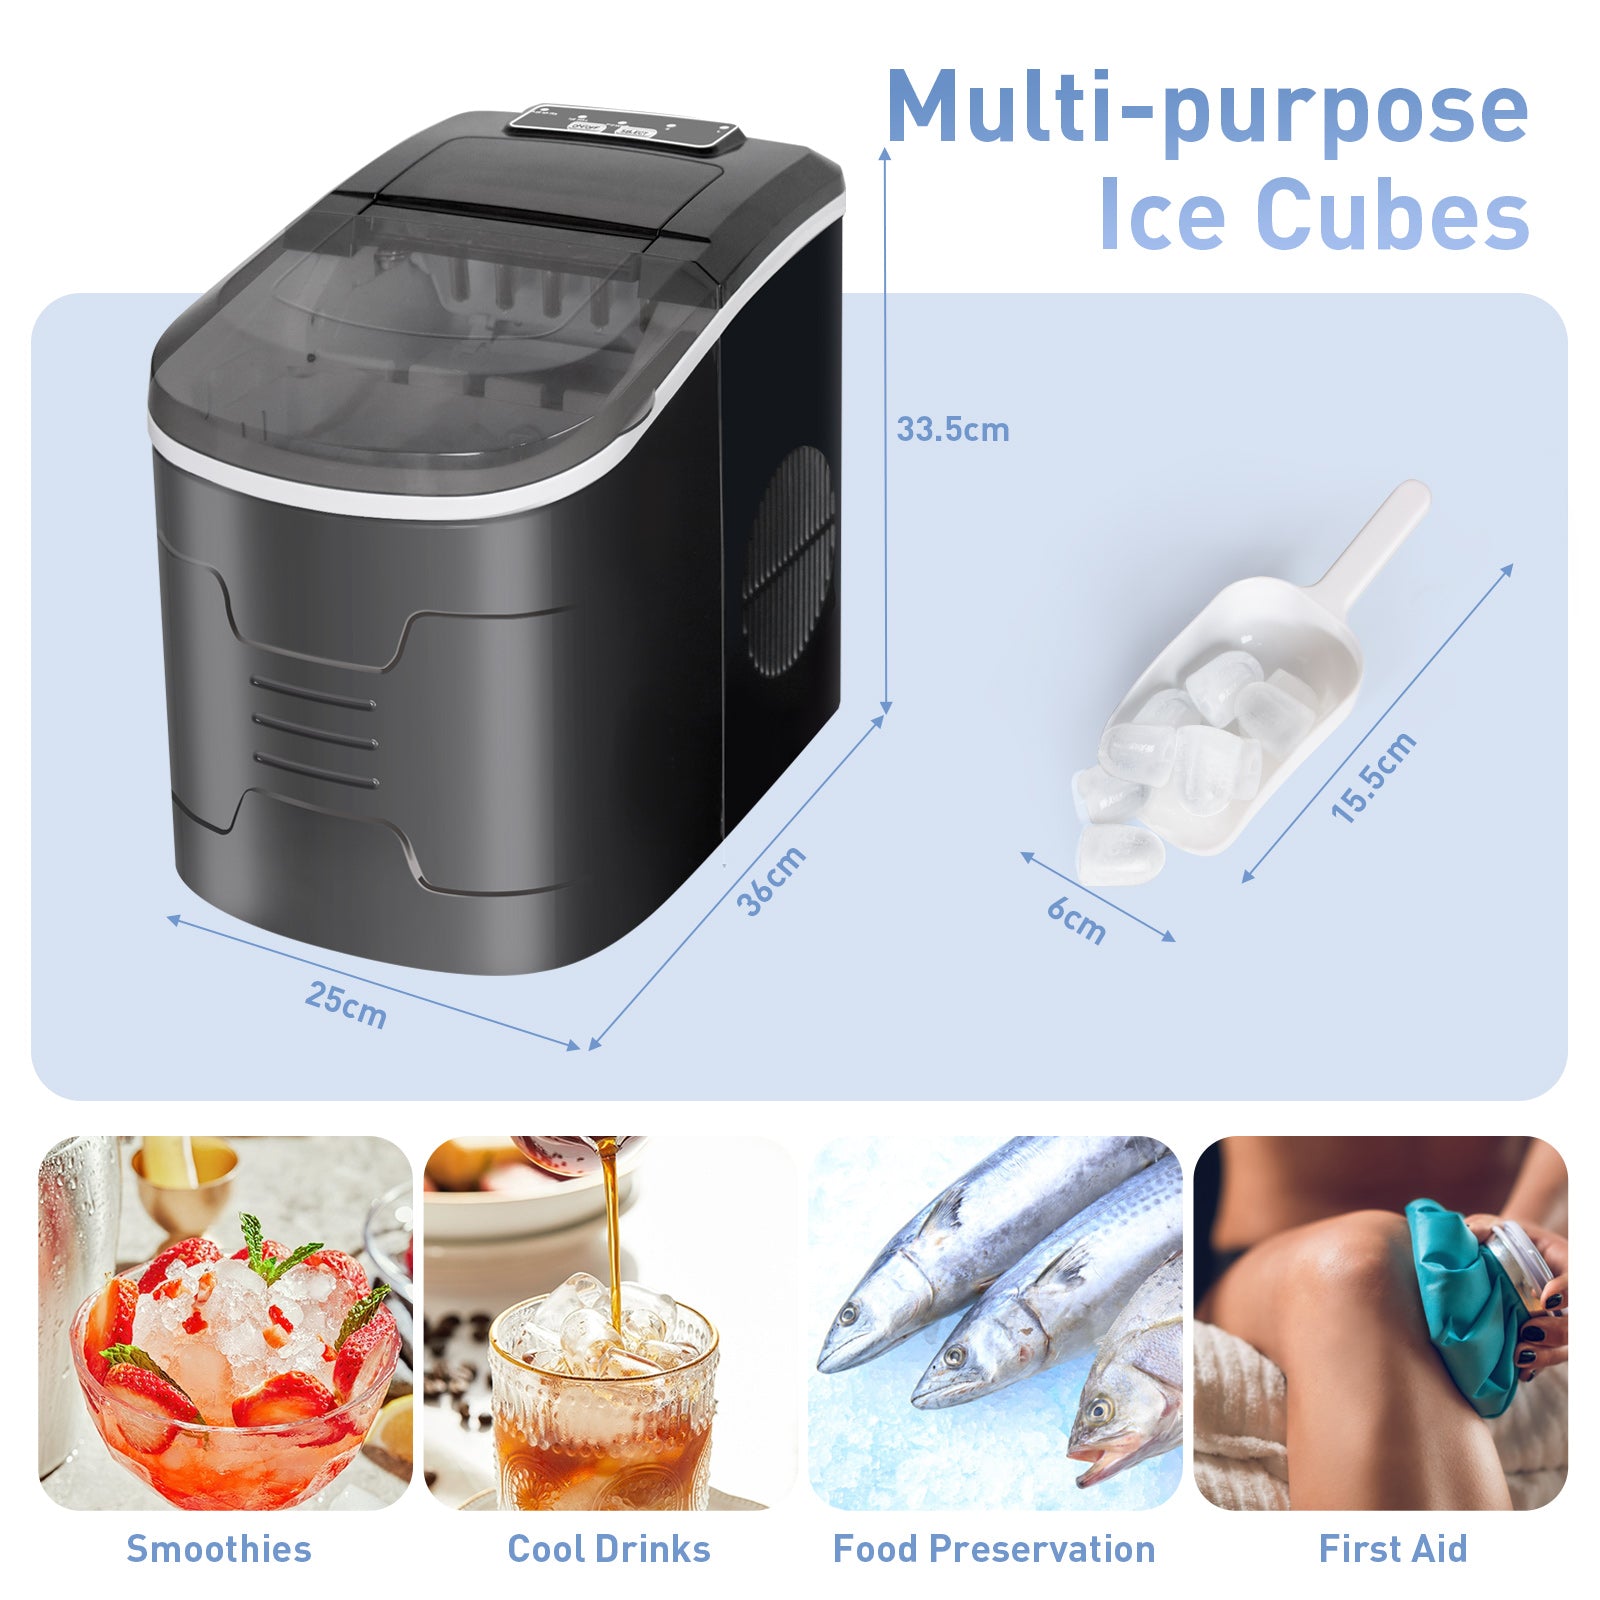 Ice-Maker-for-Home-2-2L-Capacity-2-Ice-Cube-Sizes-12kg-in-24h-9-Ice-Cubes-in-6-10-Minutes-Self-Cleaning-Ice-Maker-Large-Transparent-Lid-Ice-Maker-for-Home-Capacity-2-2L